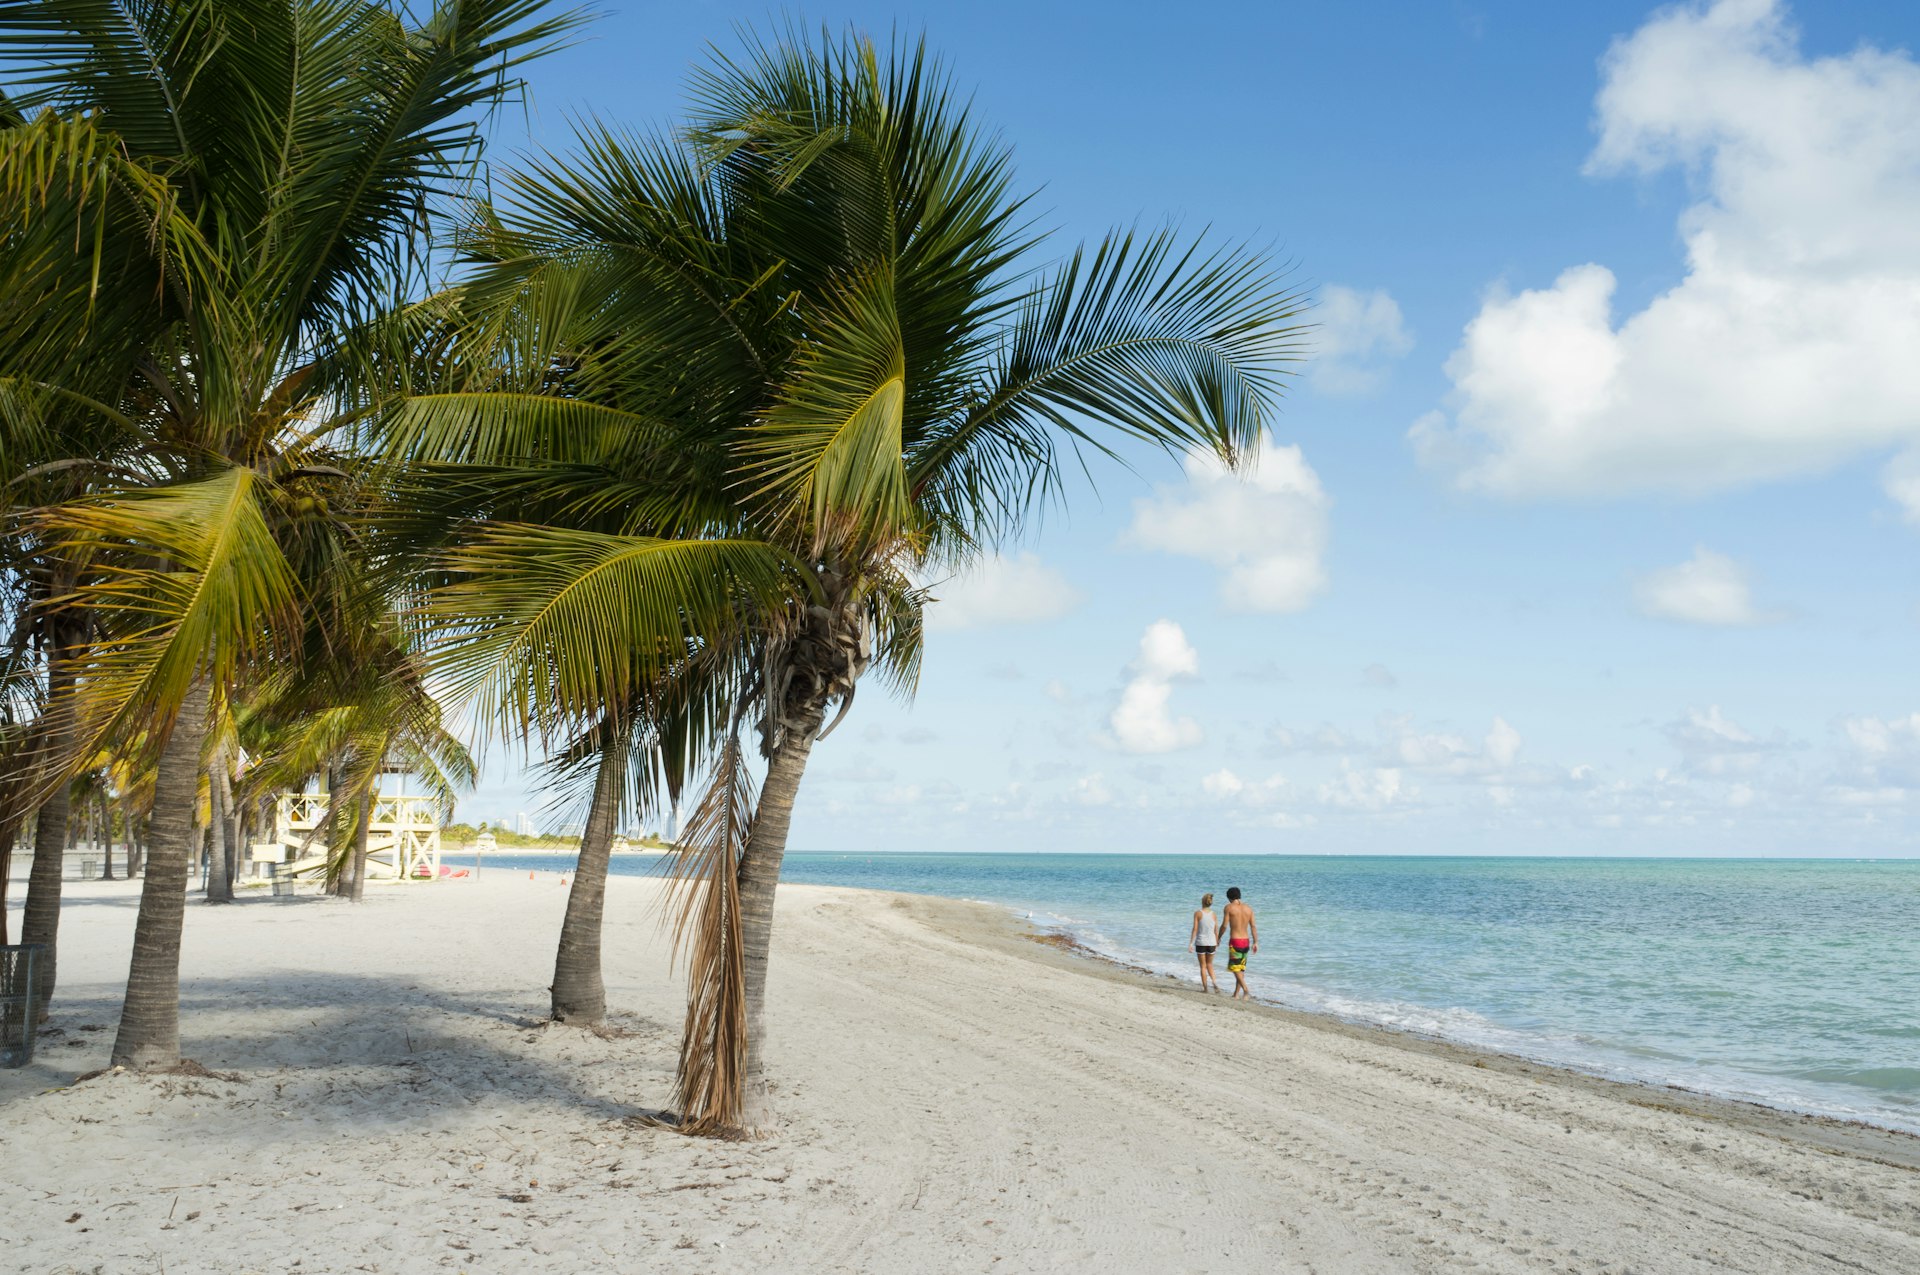 A couple in the distance, walking along a white-sand beach with palm trees 